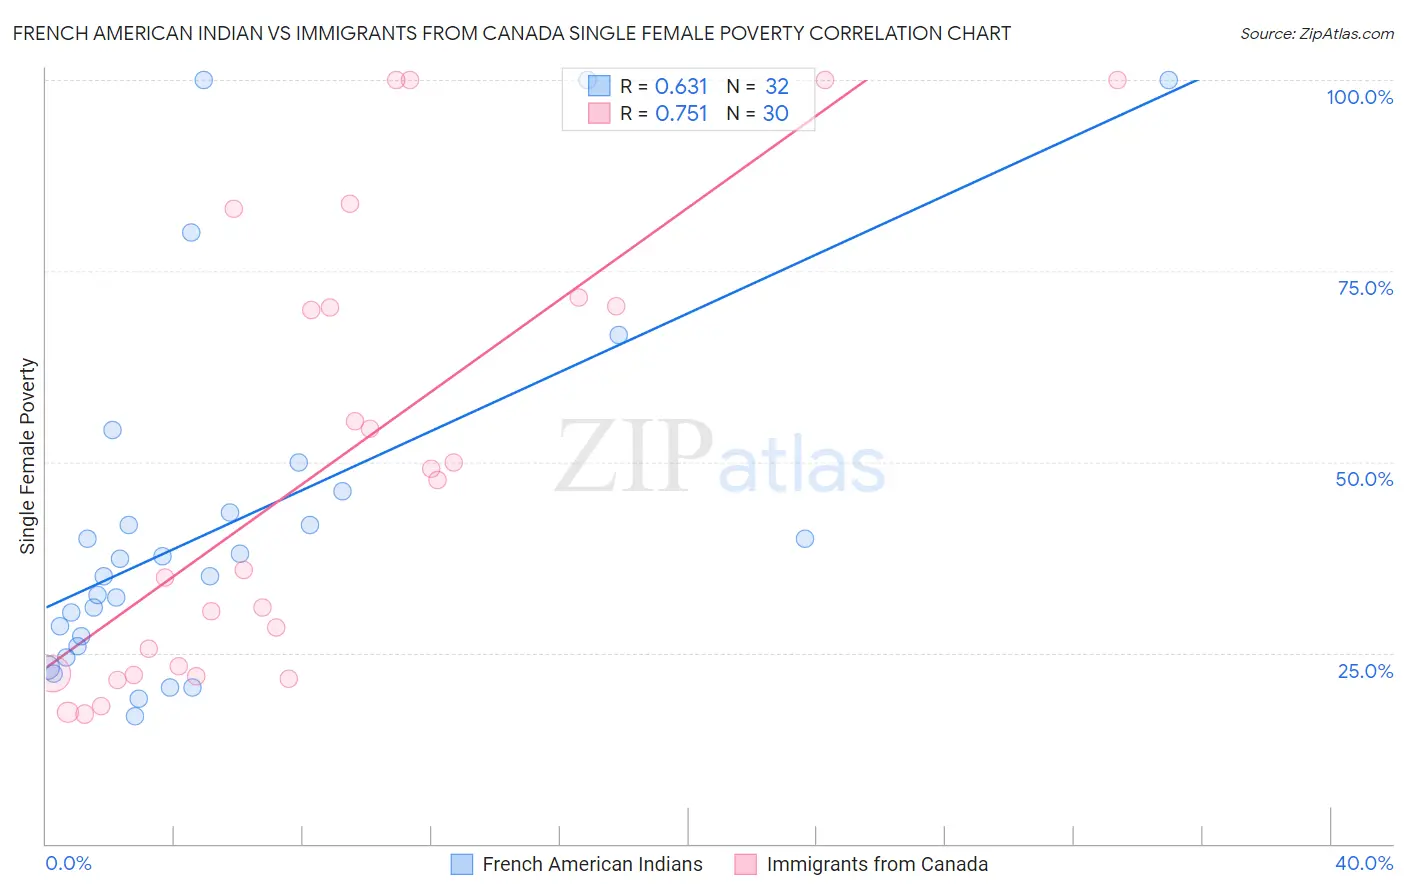 French American Indian vs Immigrants from Canada Single Female Poverty